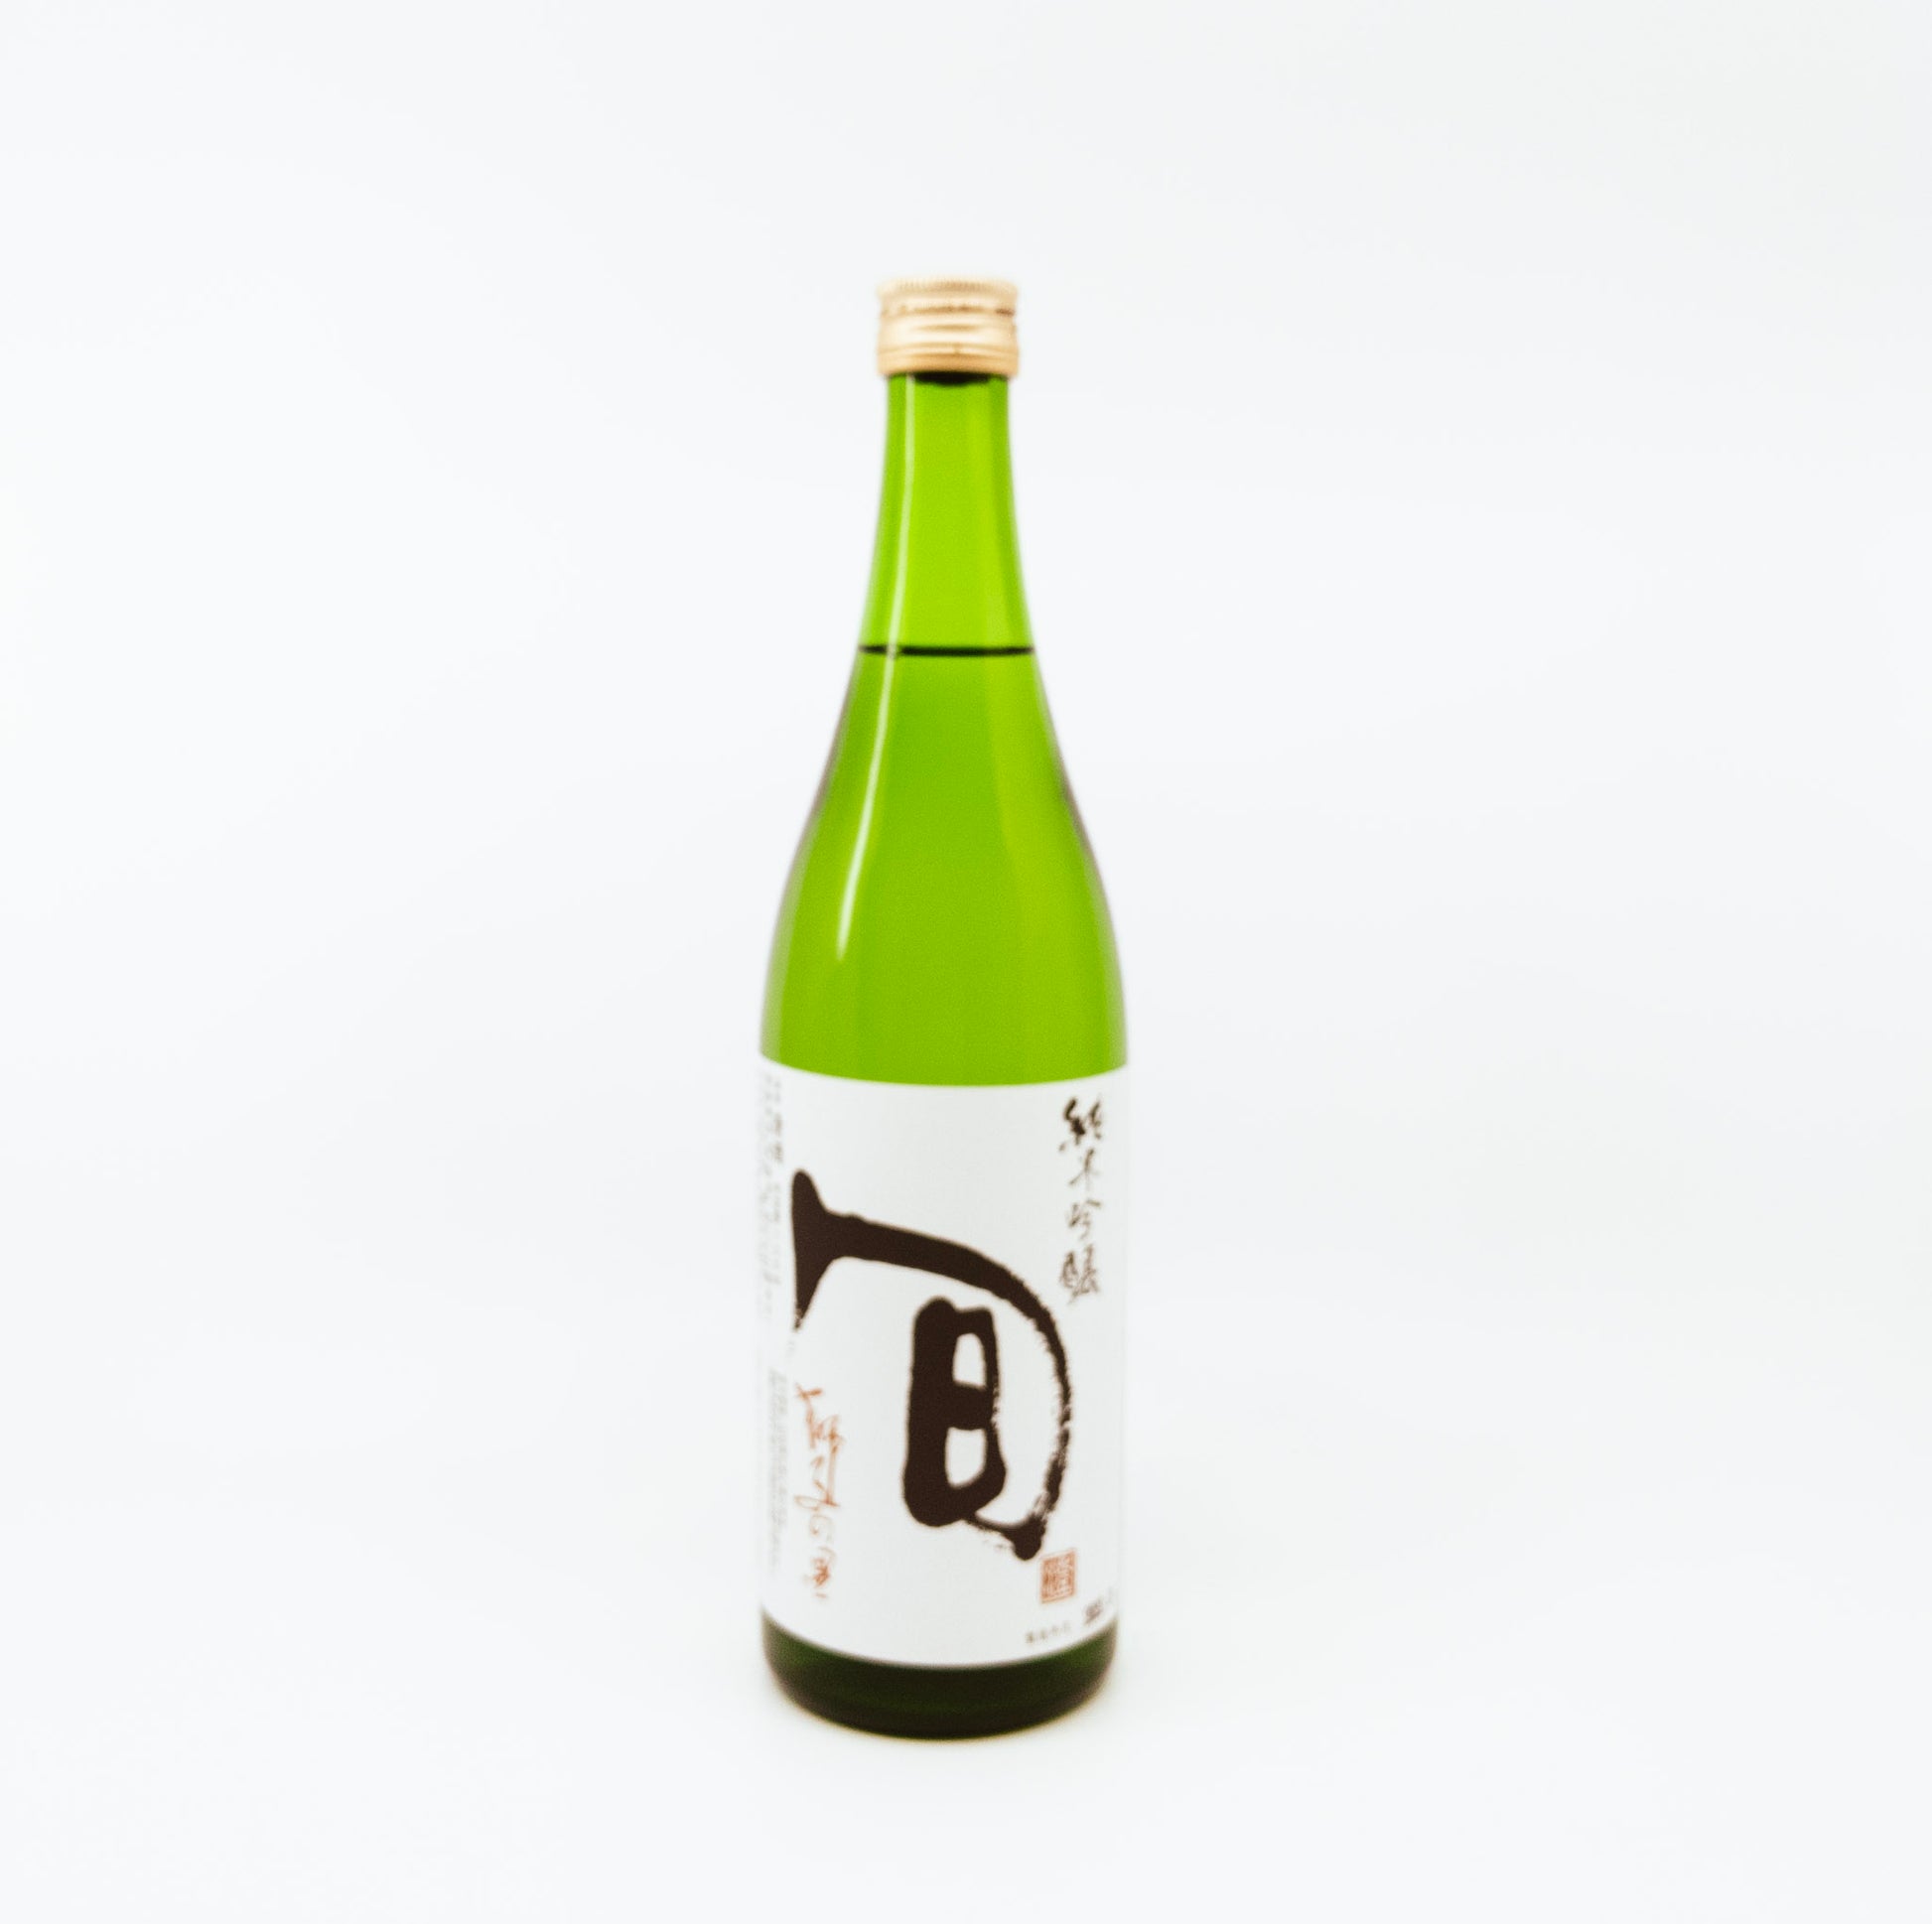 green bottle with black writing on white label